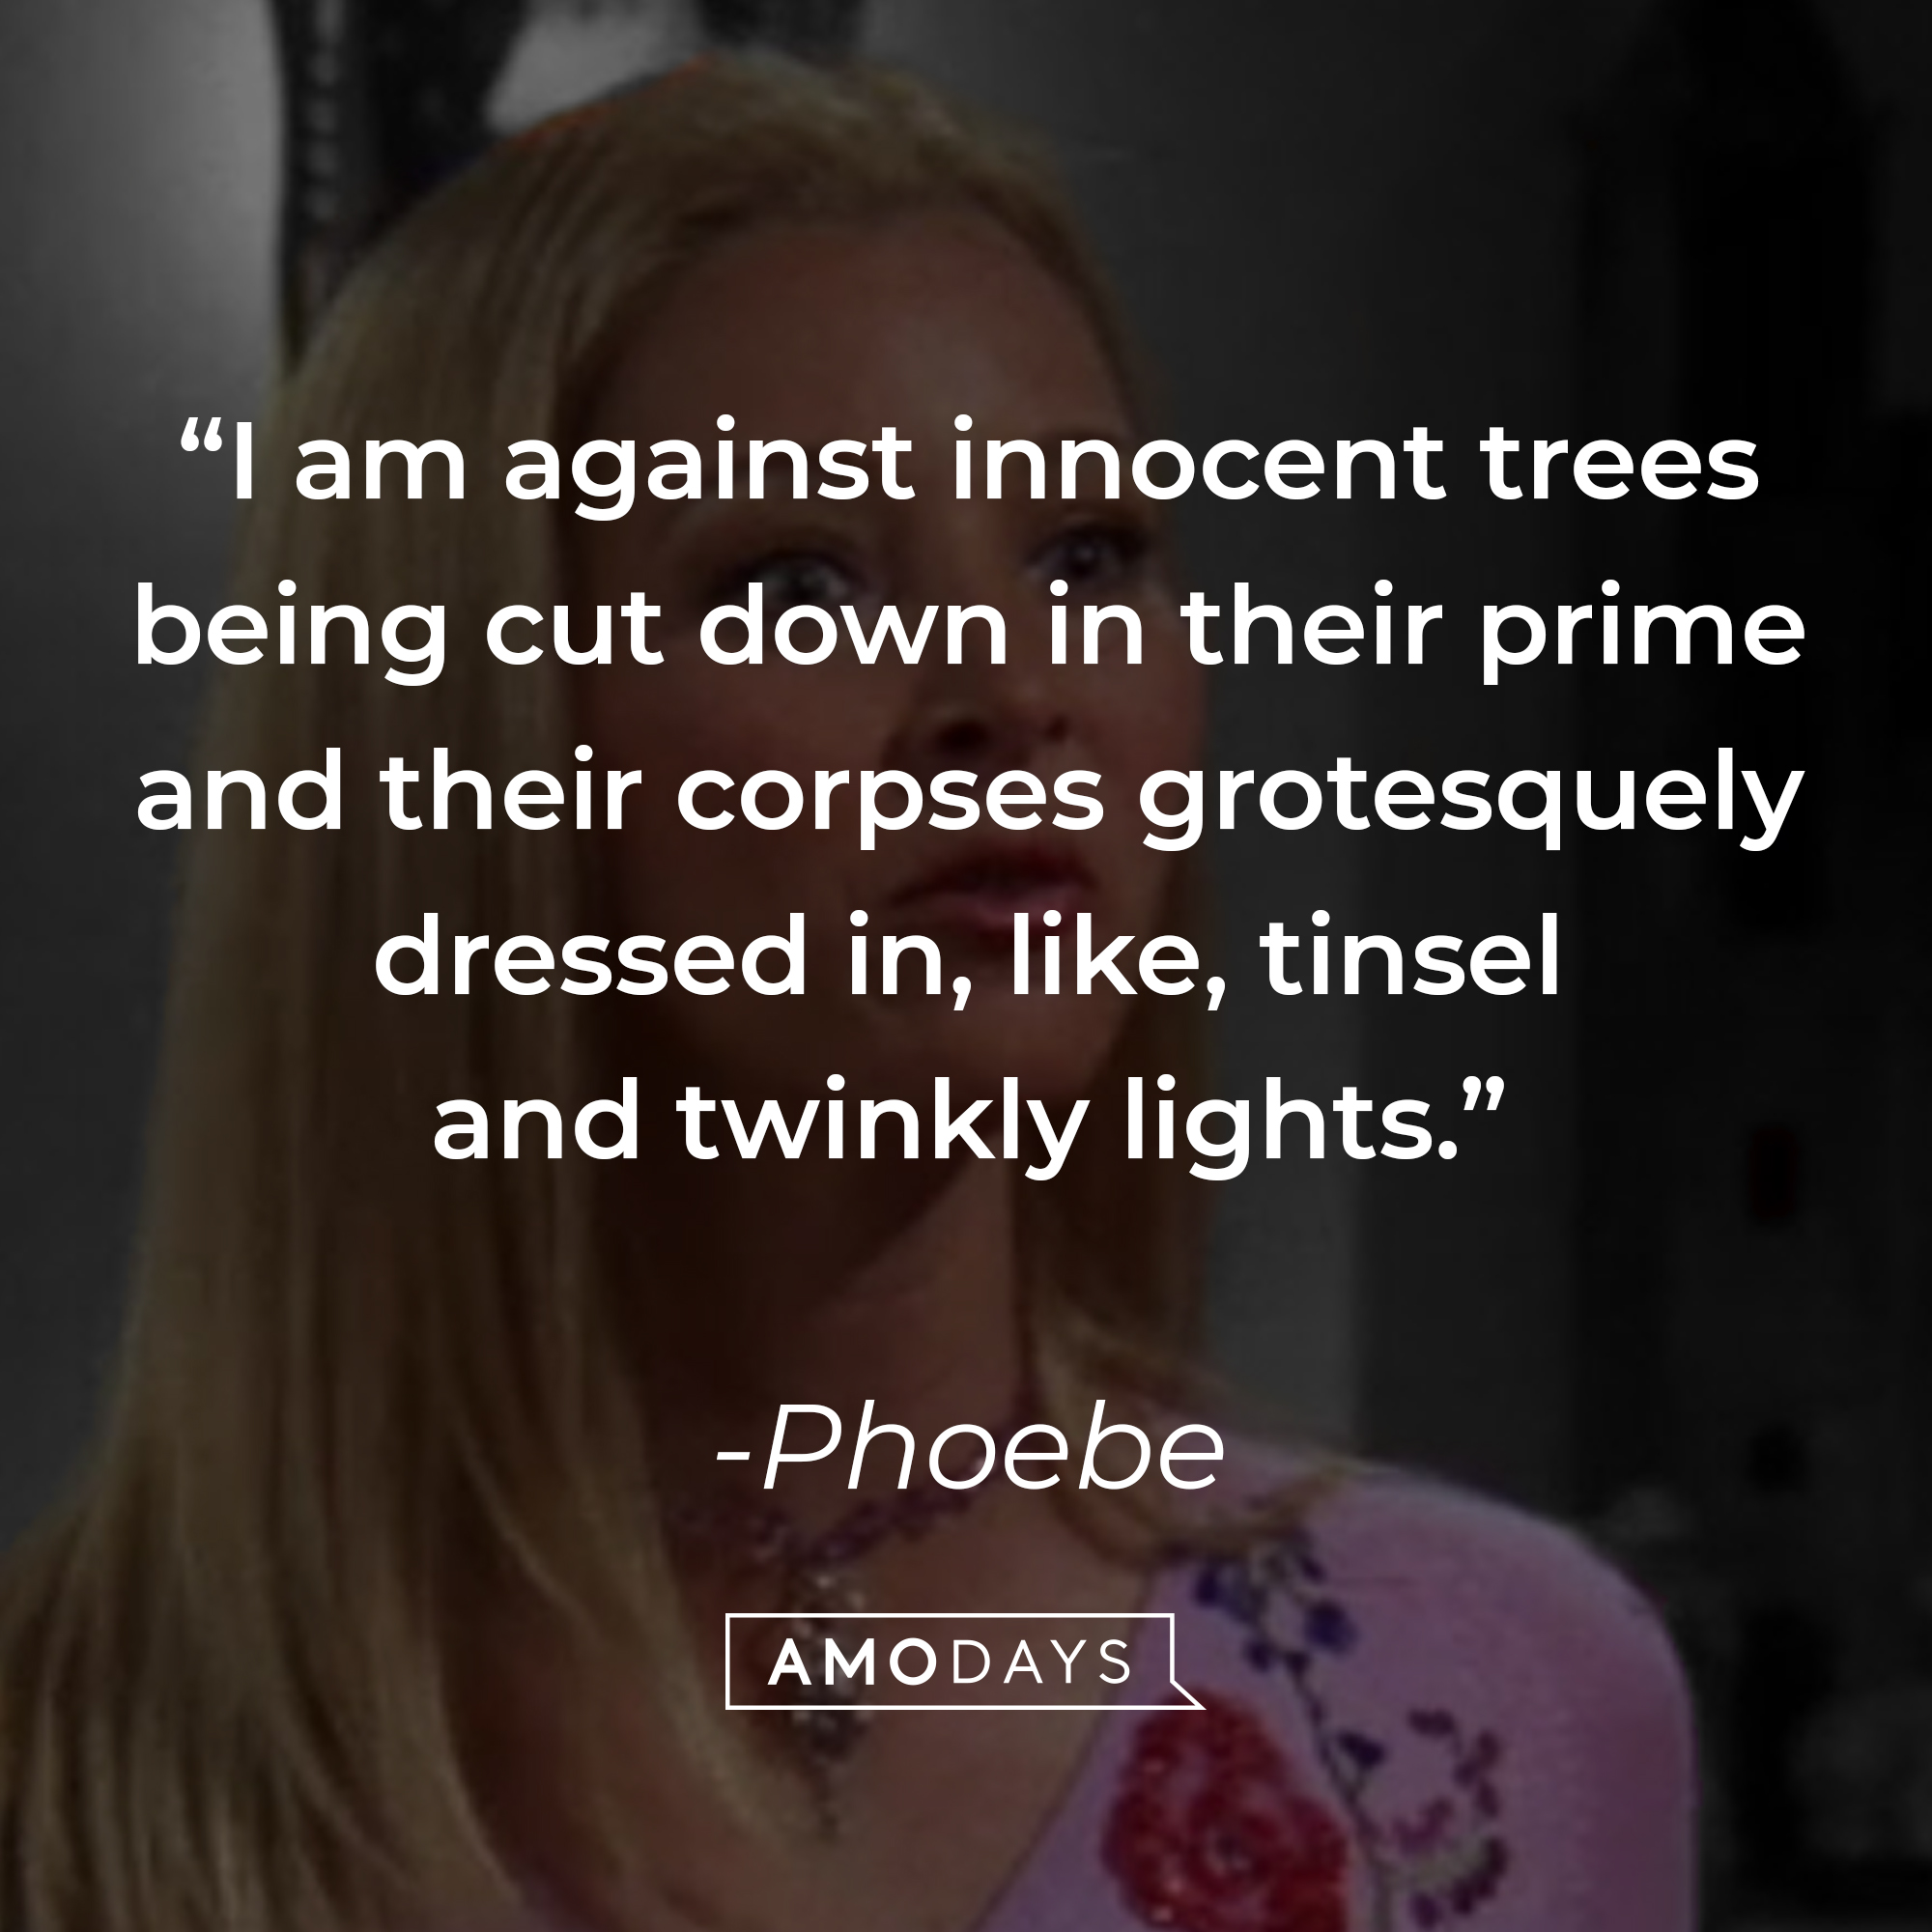 Phoebe's quote: "I am against innocent trees being cut down in their prime and their corpses grotesquely dressed in, like, tinsel and twinkly lights." | Source: Facebook.com/friends.tv